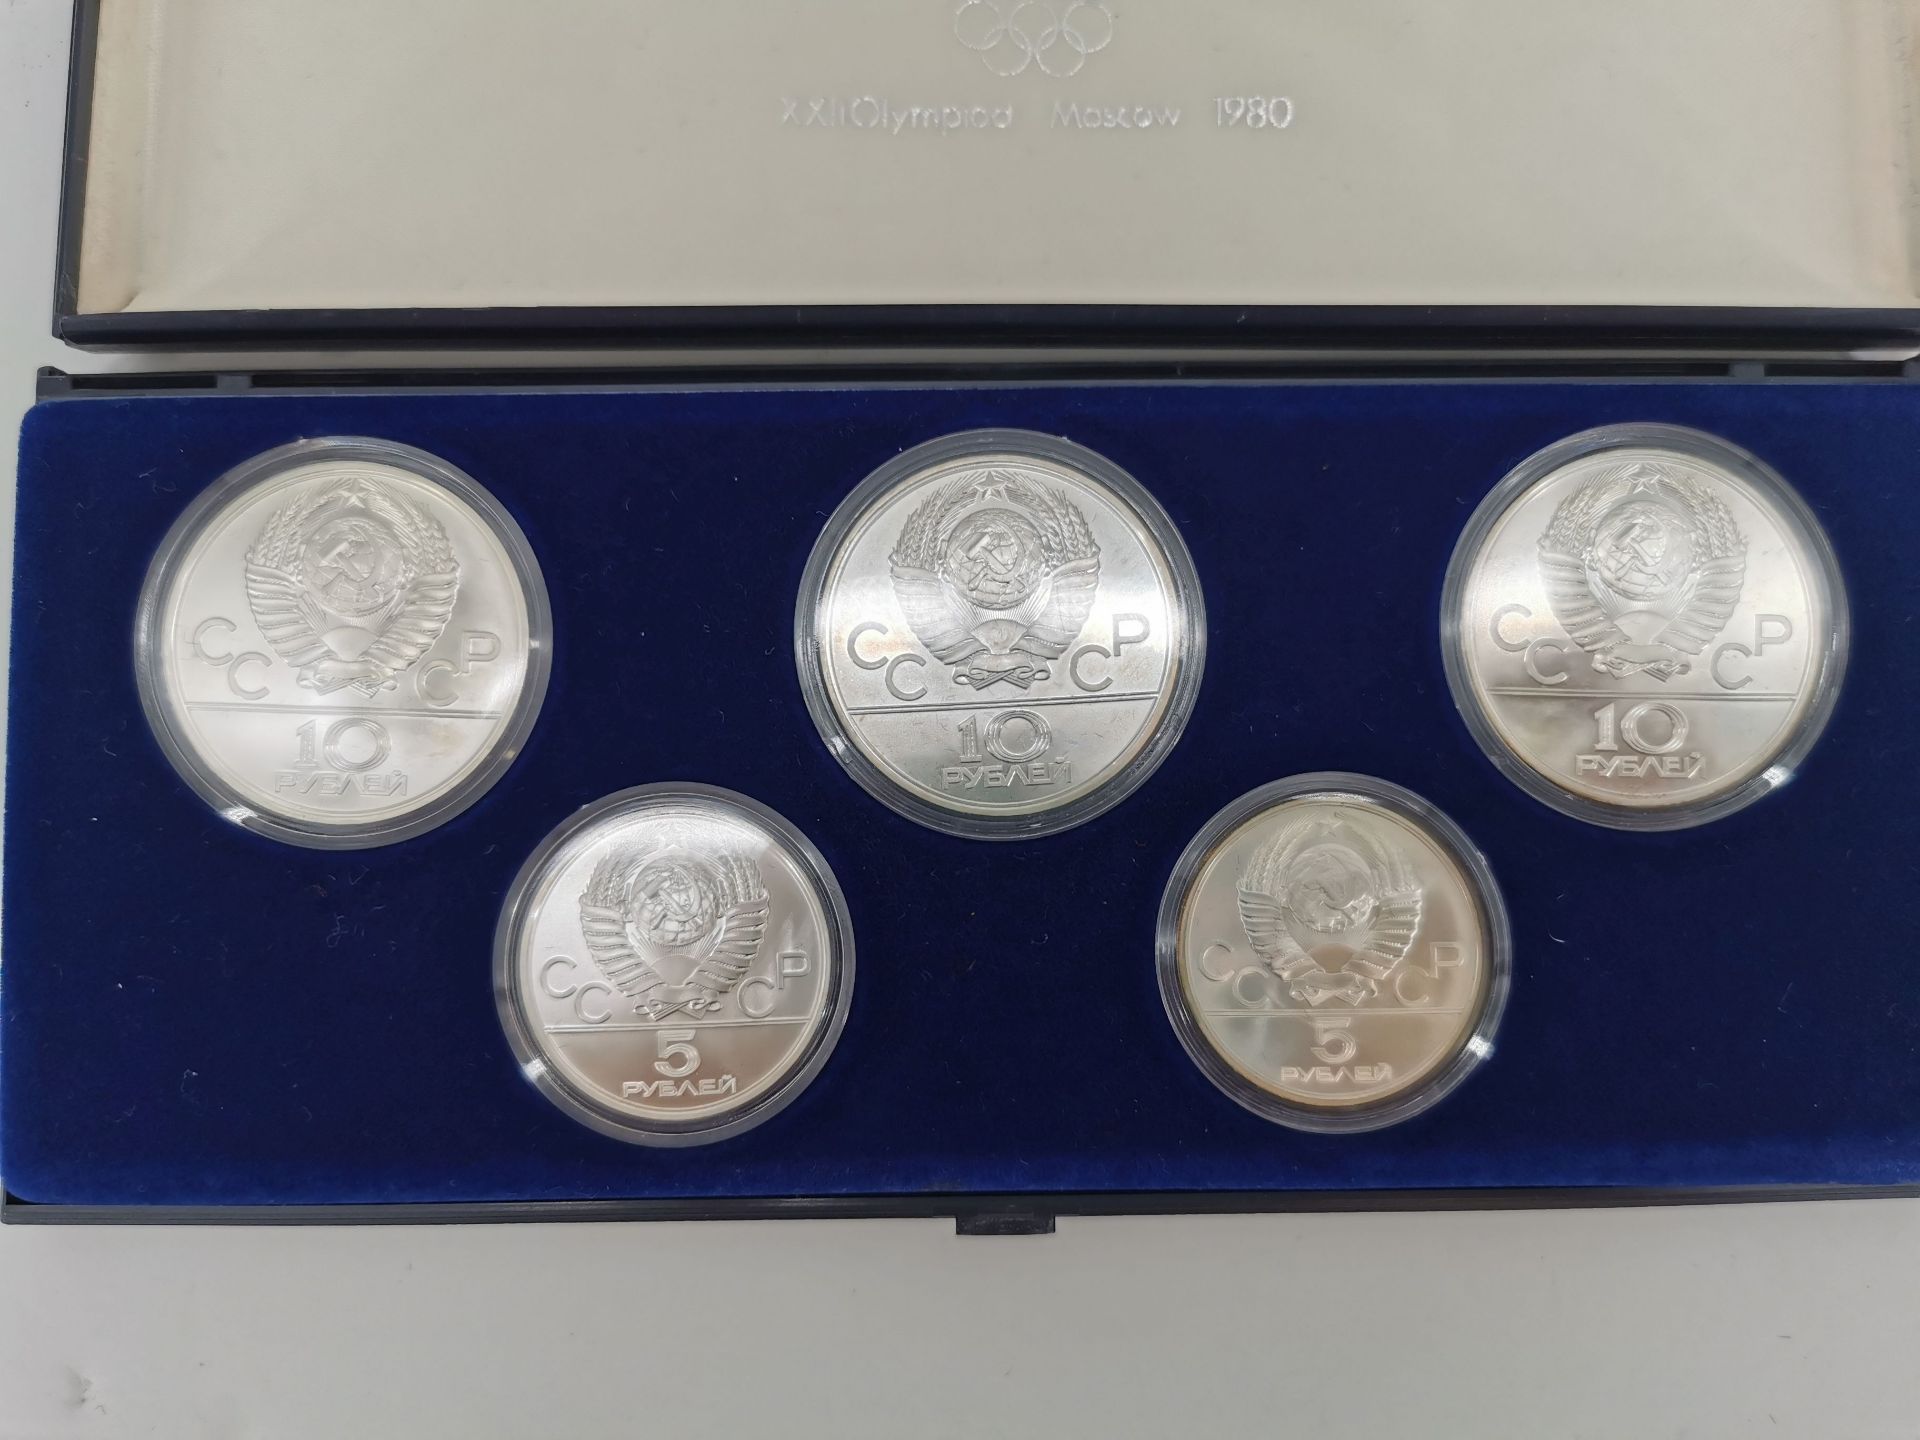 OLYMPIC GAMES COIN SET - 5 COINS - Image 3 of 4